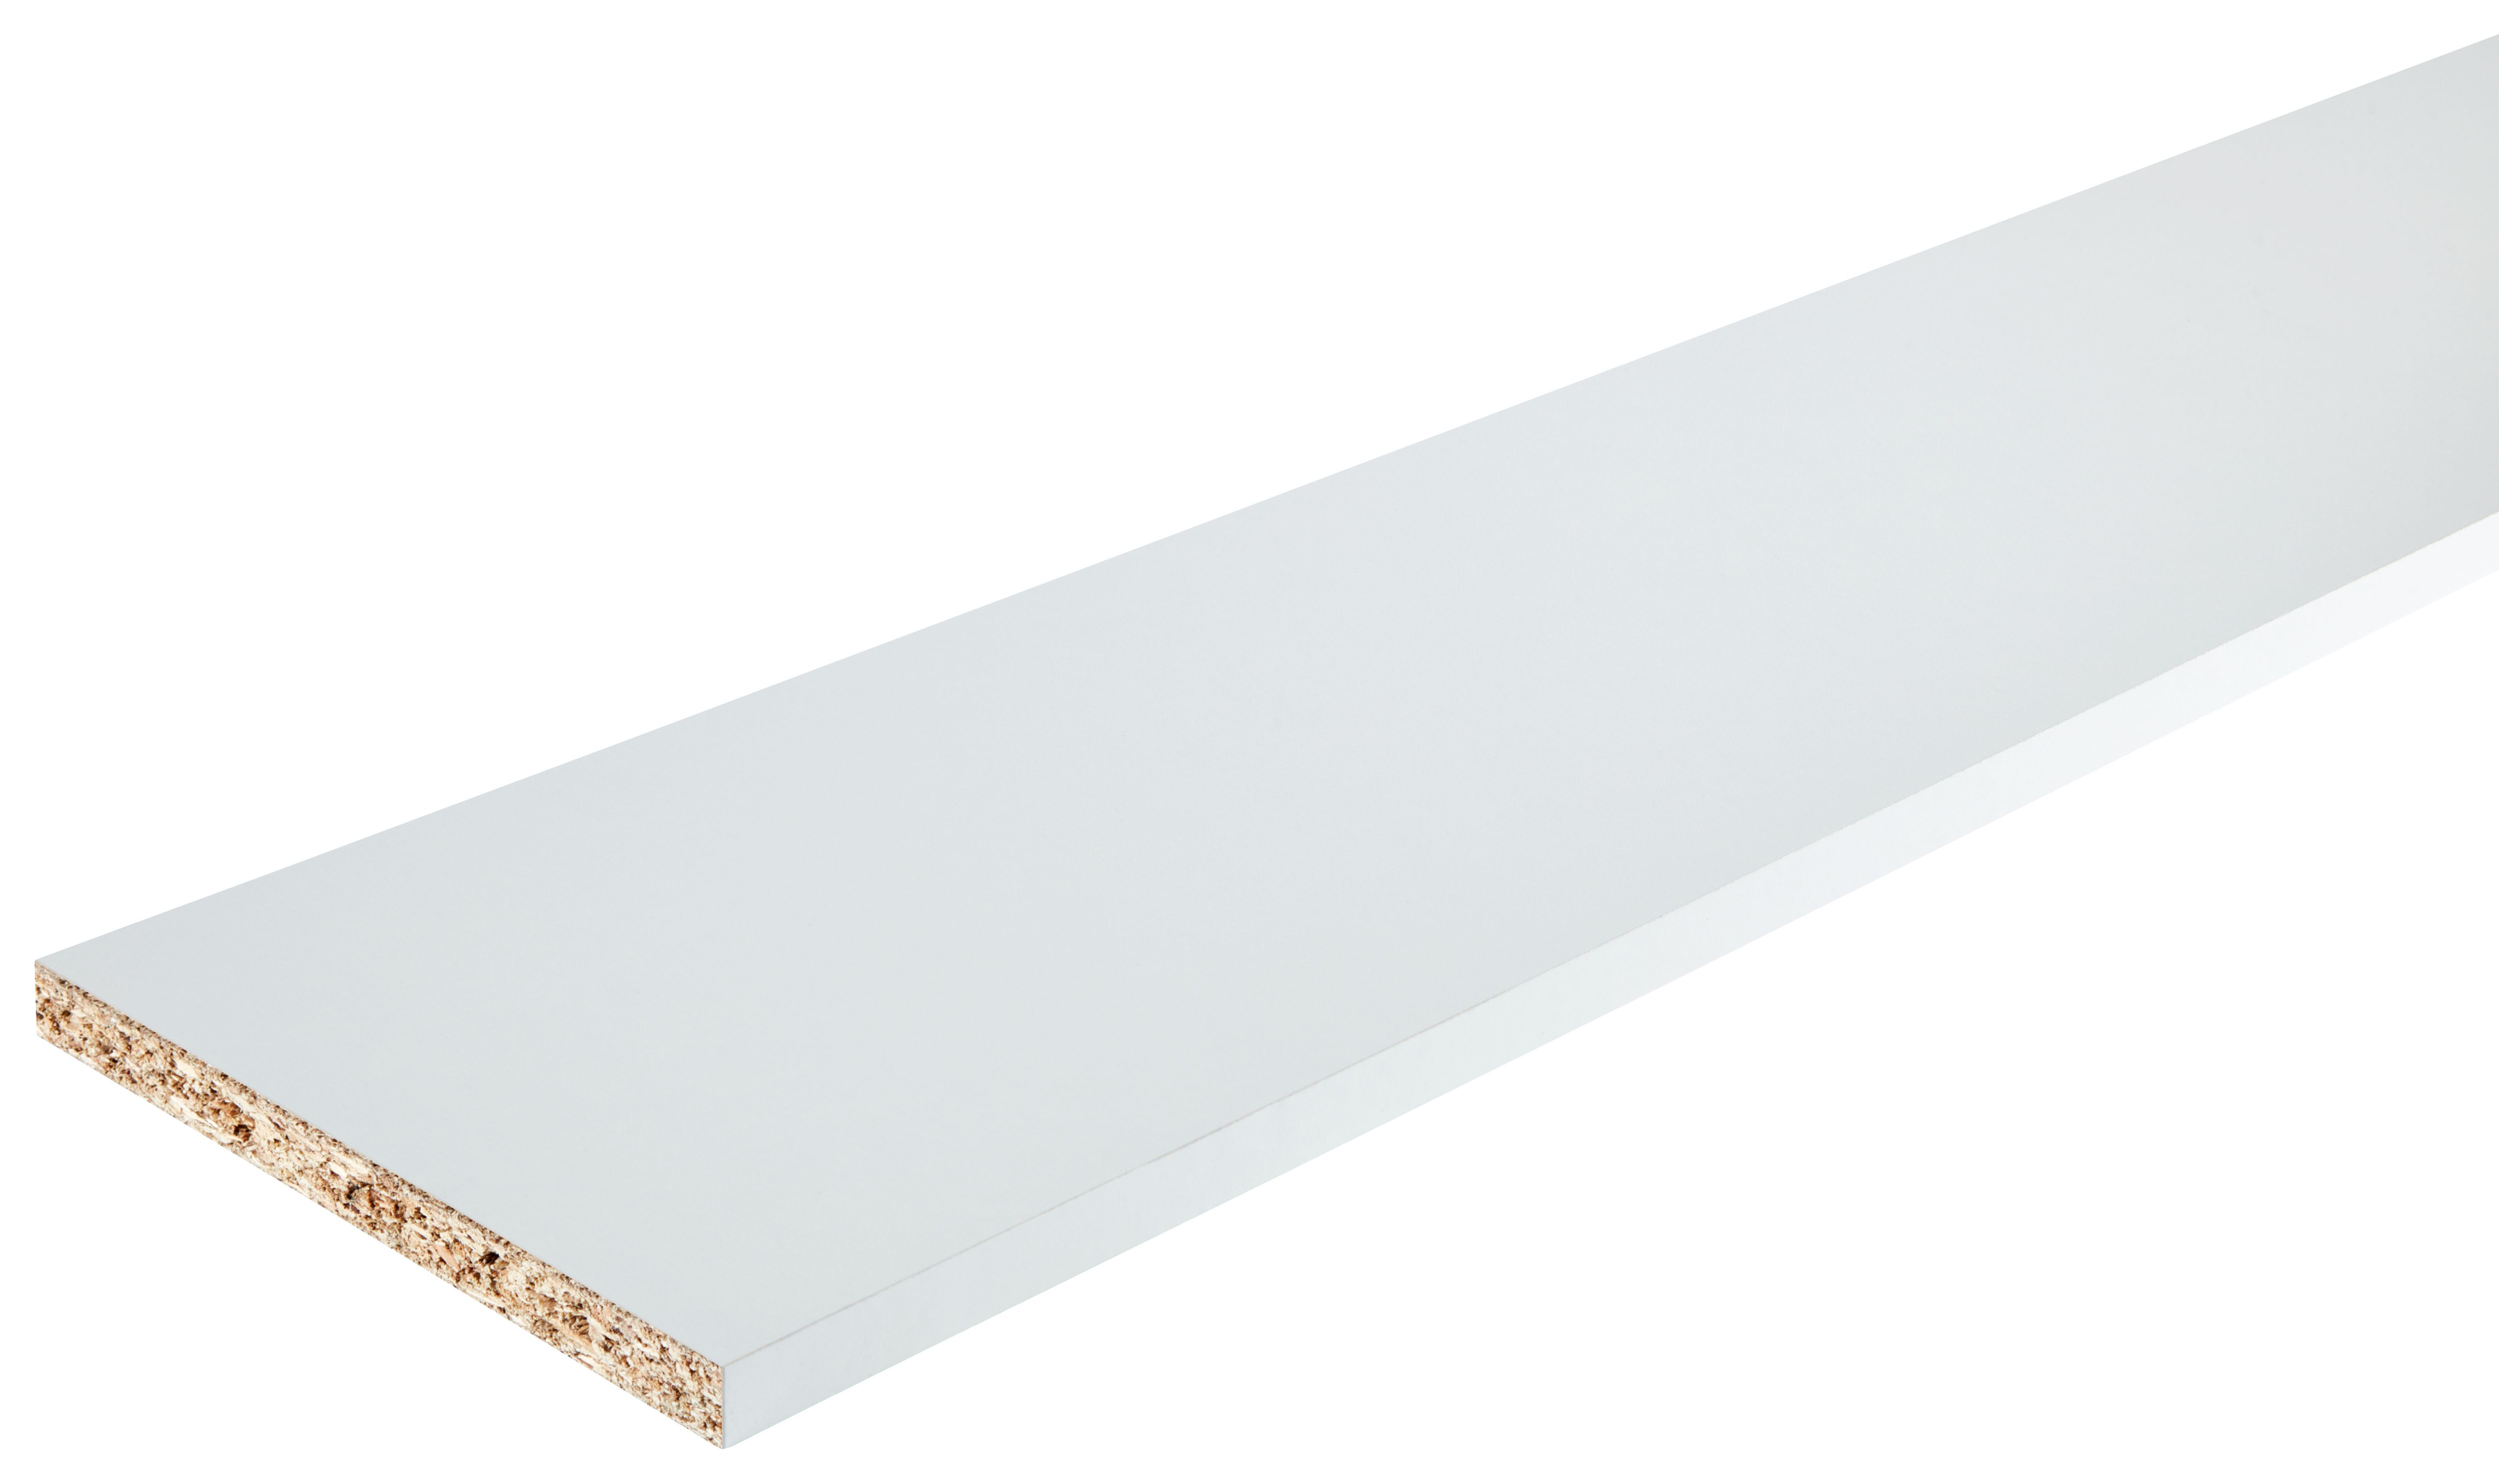 Image of Wickes MFC White Furniture Panel - 15mm x 500mm x 2400mm